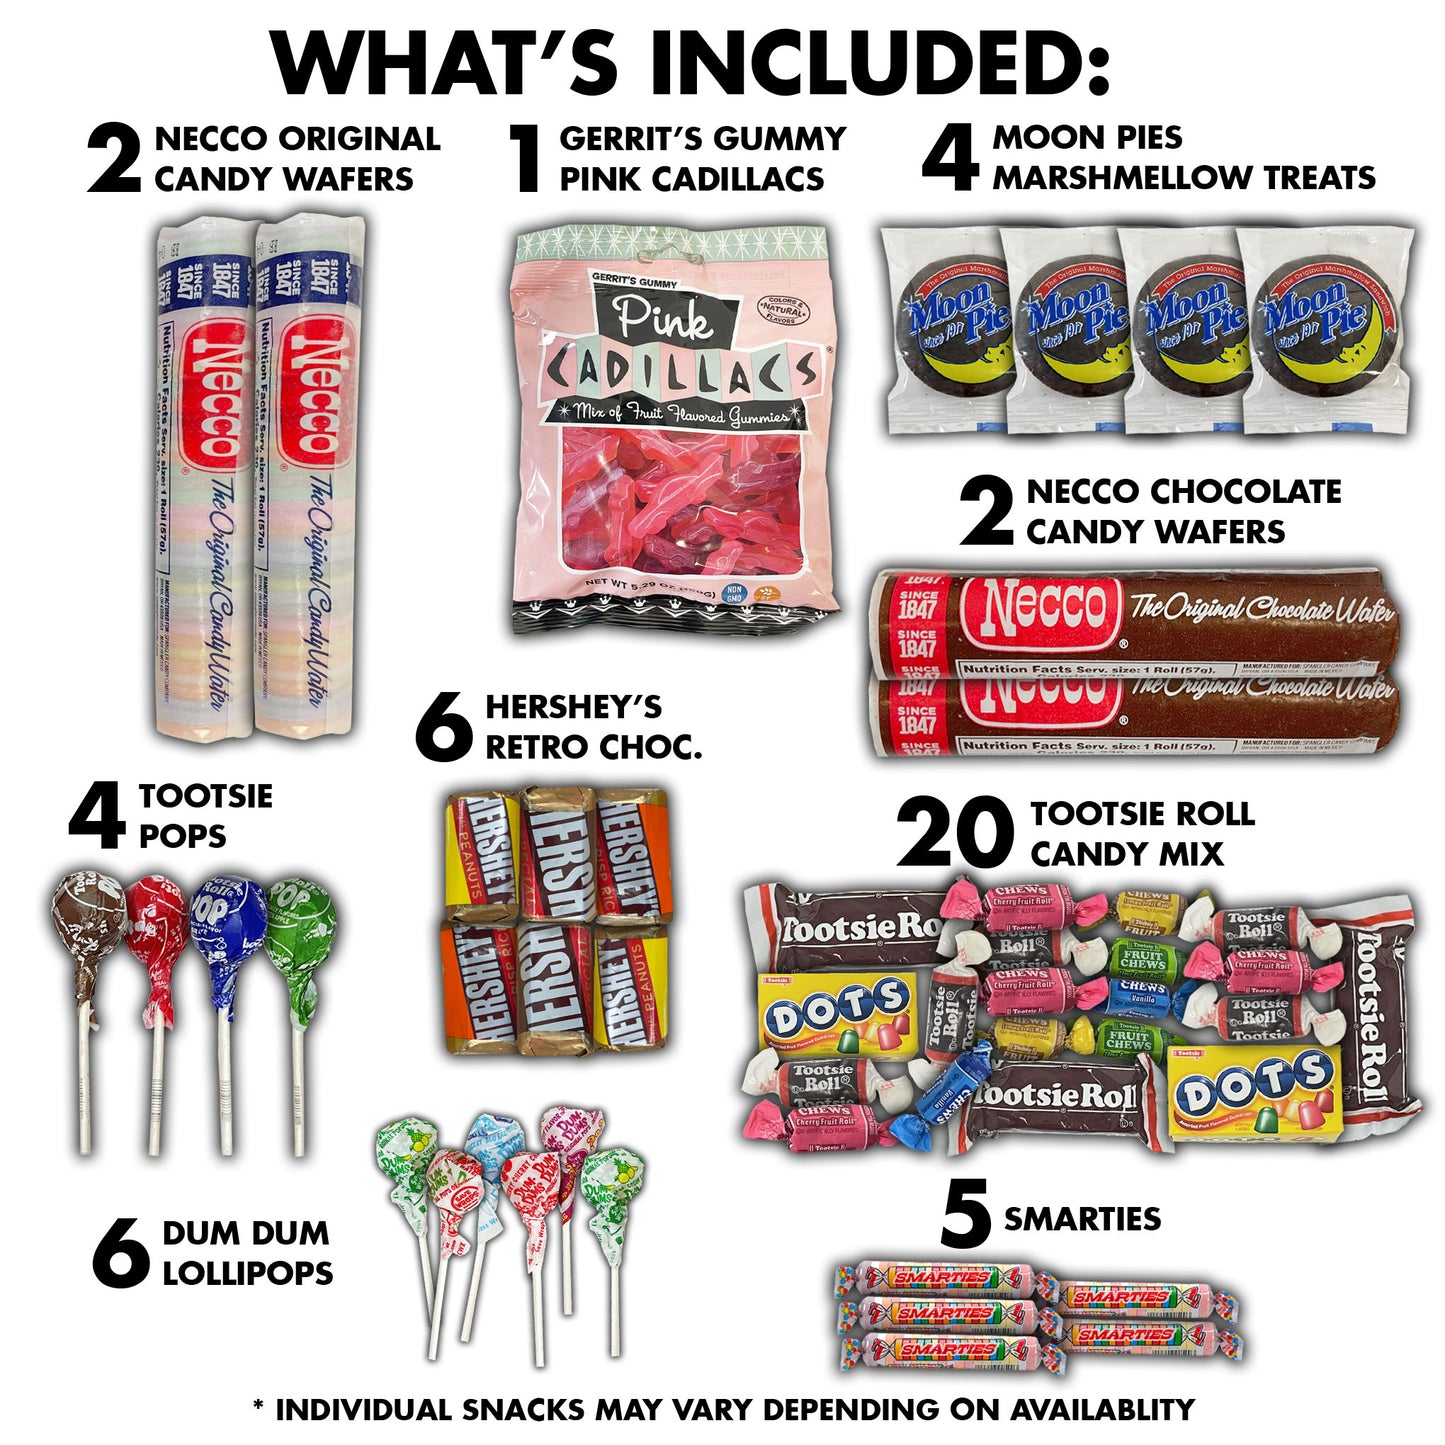 What's Included Necco candy wafers, Gerrits Gummy pink Cadillacs, moon pies, tootsie pops, Hersheys, Necco Chocolate candy wafers, Smarties, Tootsie Roll assorted, Dum Dum Lollipops